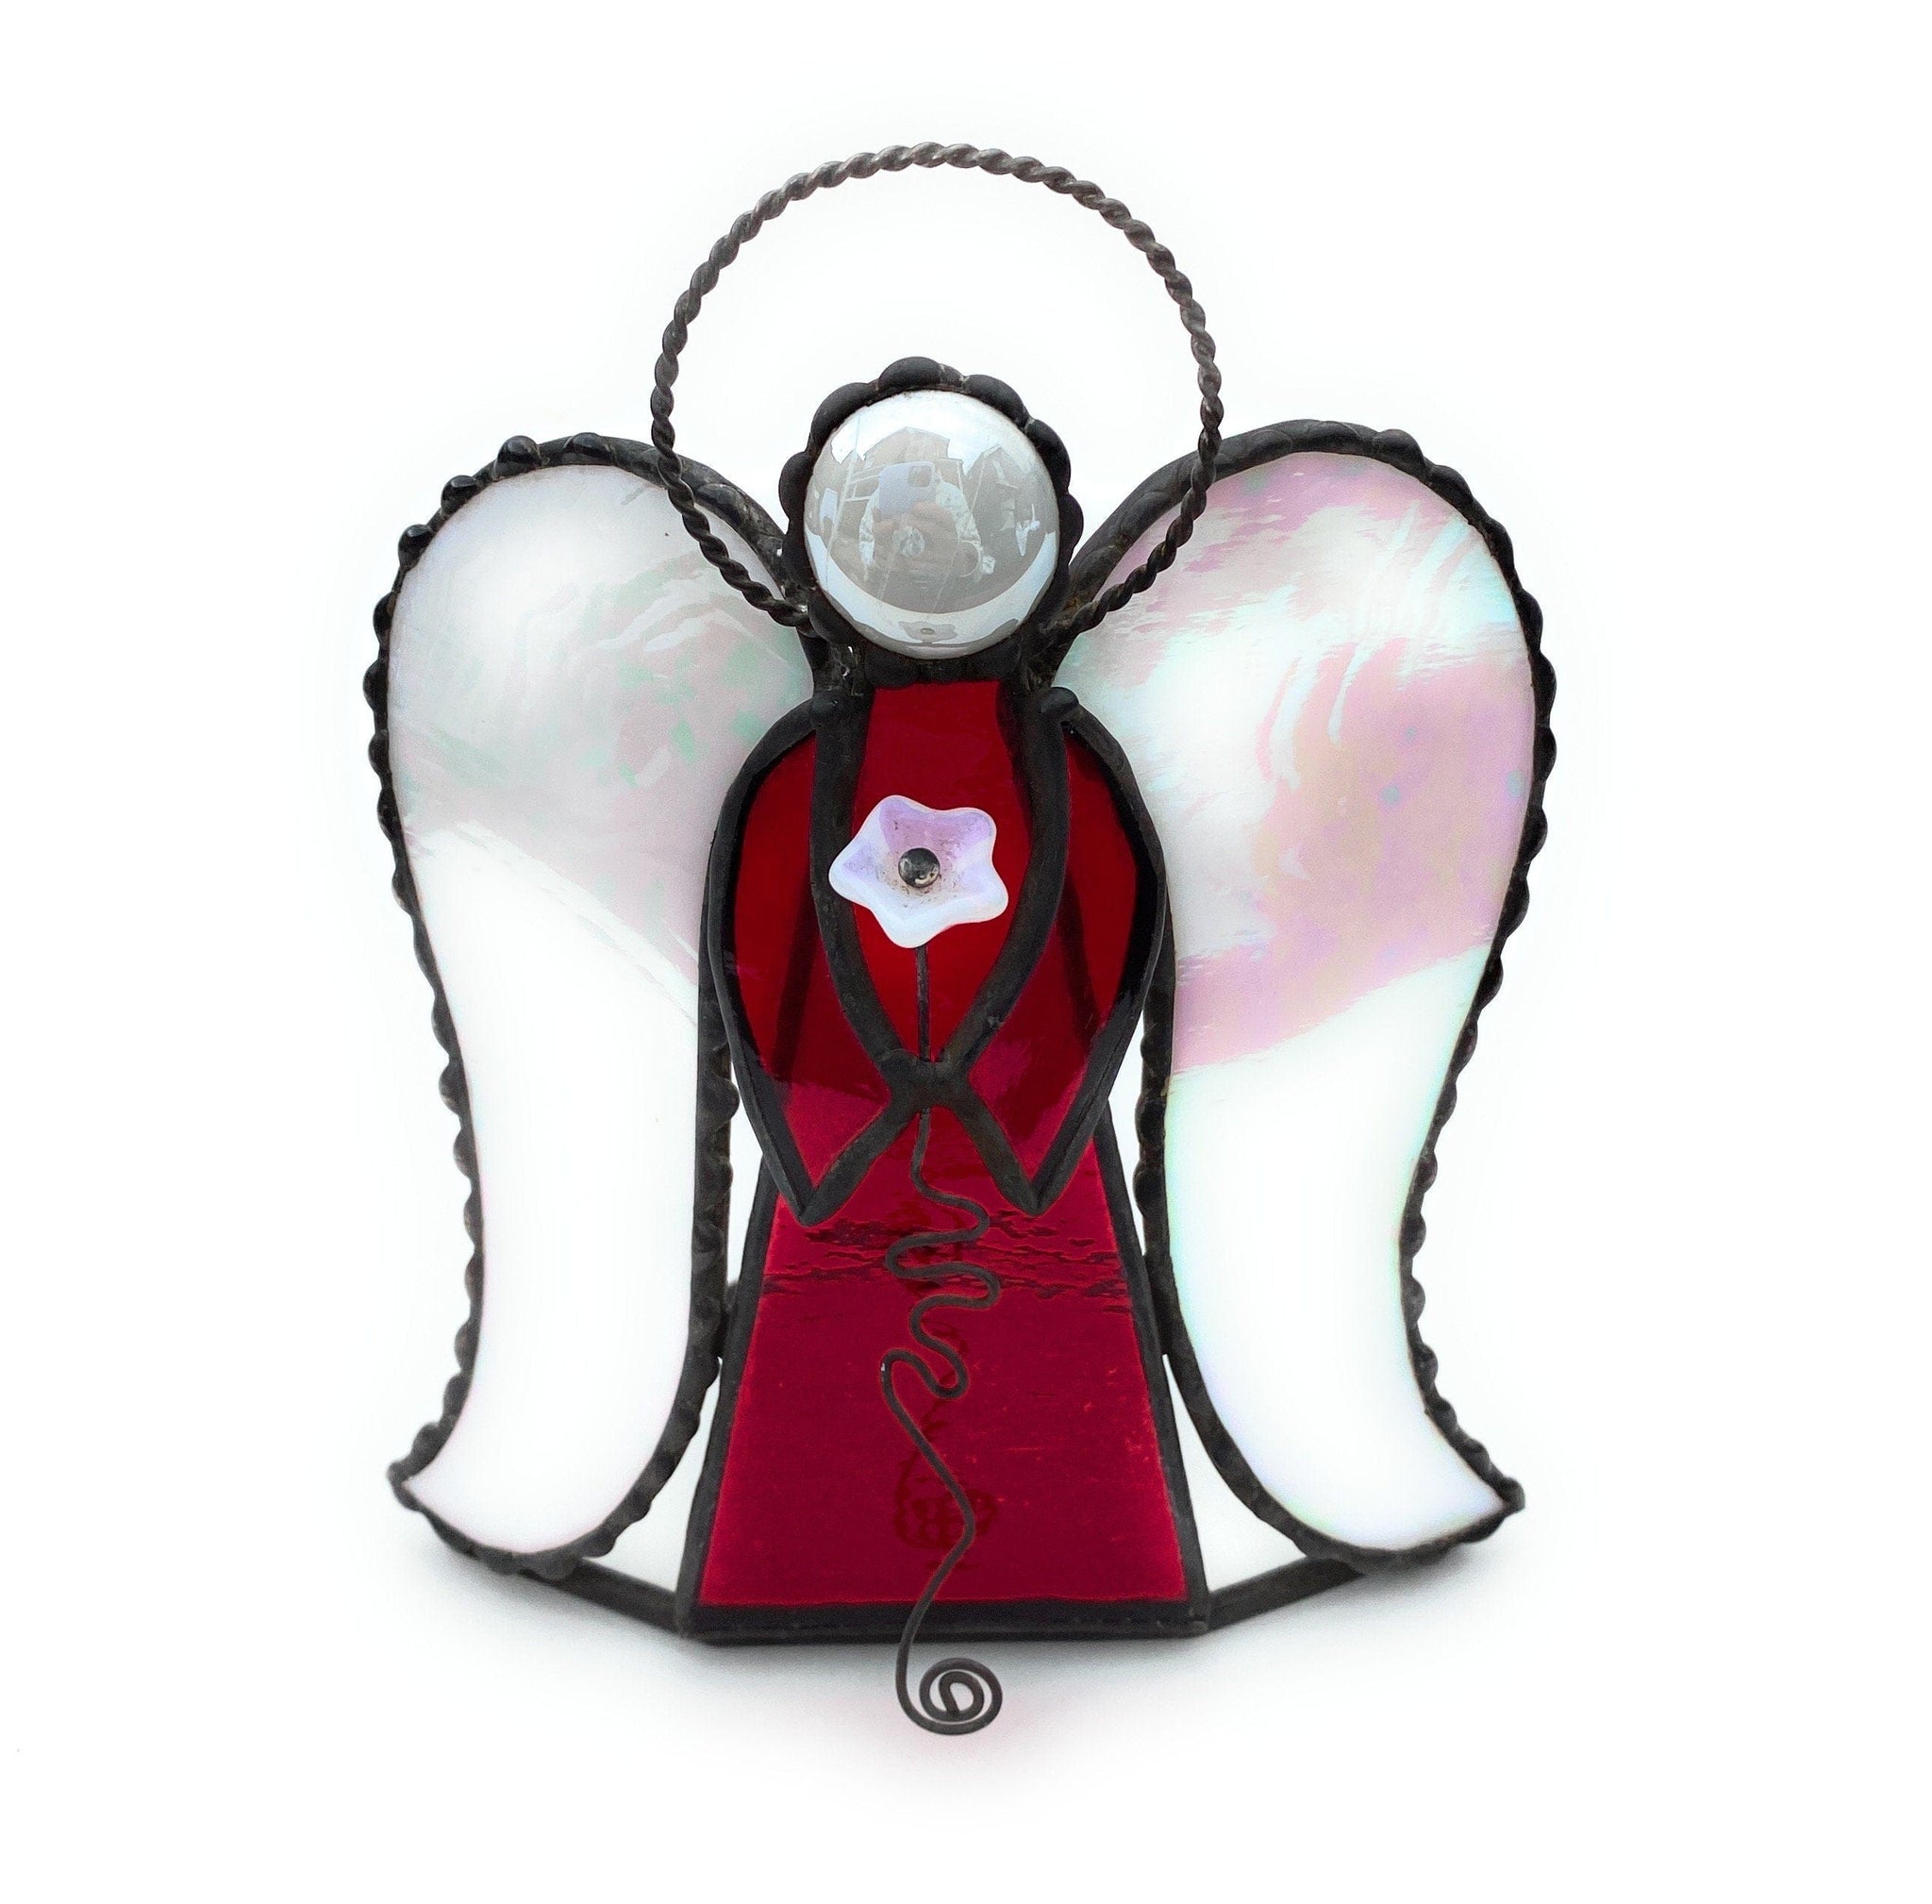 LeKoky Decor STANDING ANGEL  Handcrafted Home Glass Accessory Red made by Lenka in Southampton England